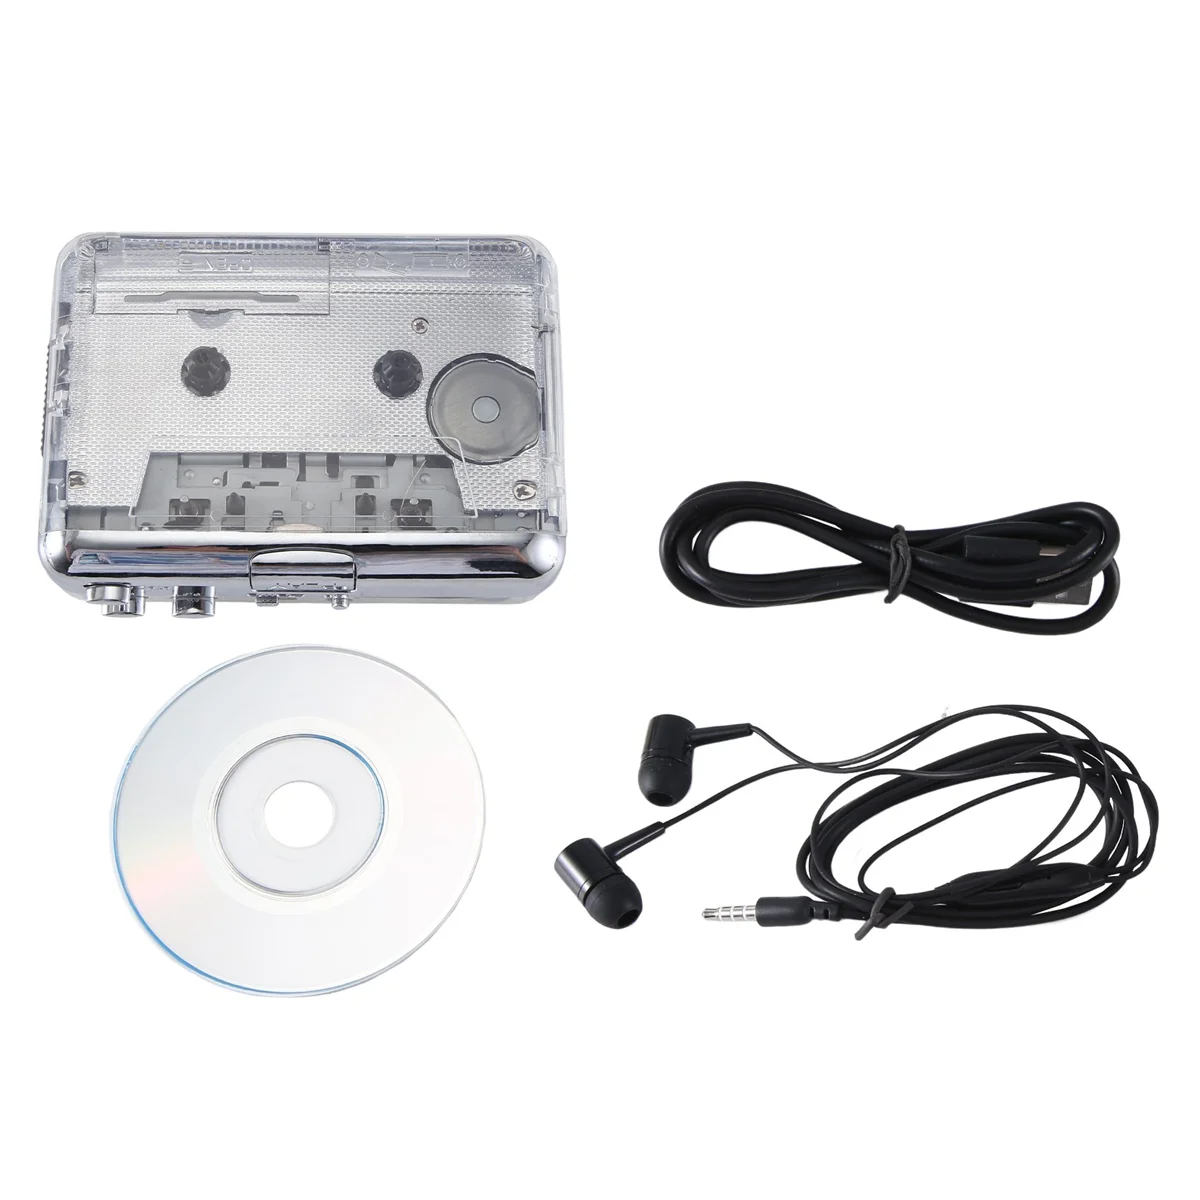 

Cassette Player Portable USB Capture Tape to MP3 Audio Music Converter USB Walkman for Laptop and Personal Computers